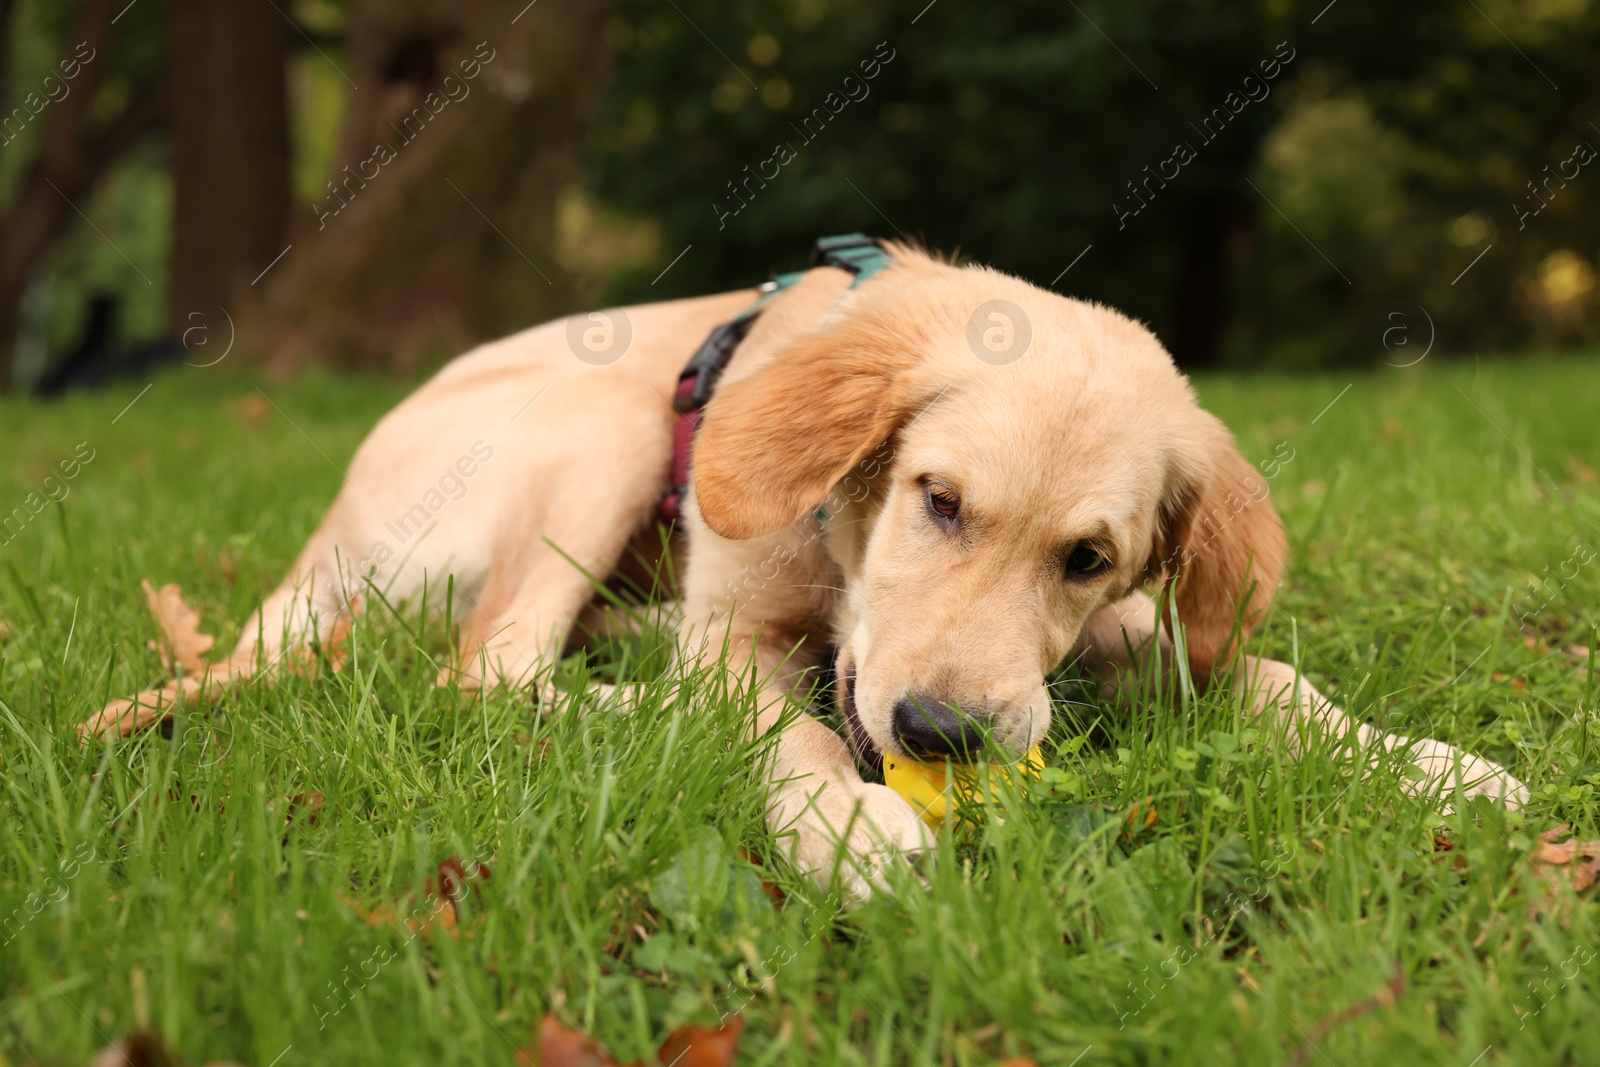 Photo of Cute Labrador Retriever puppy playing with ball on green grass in park